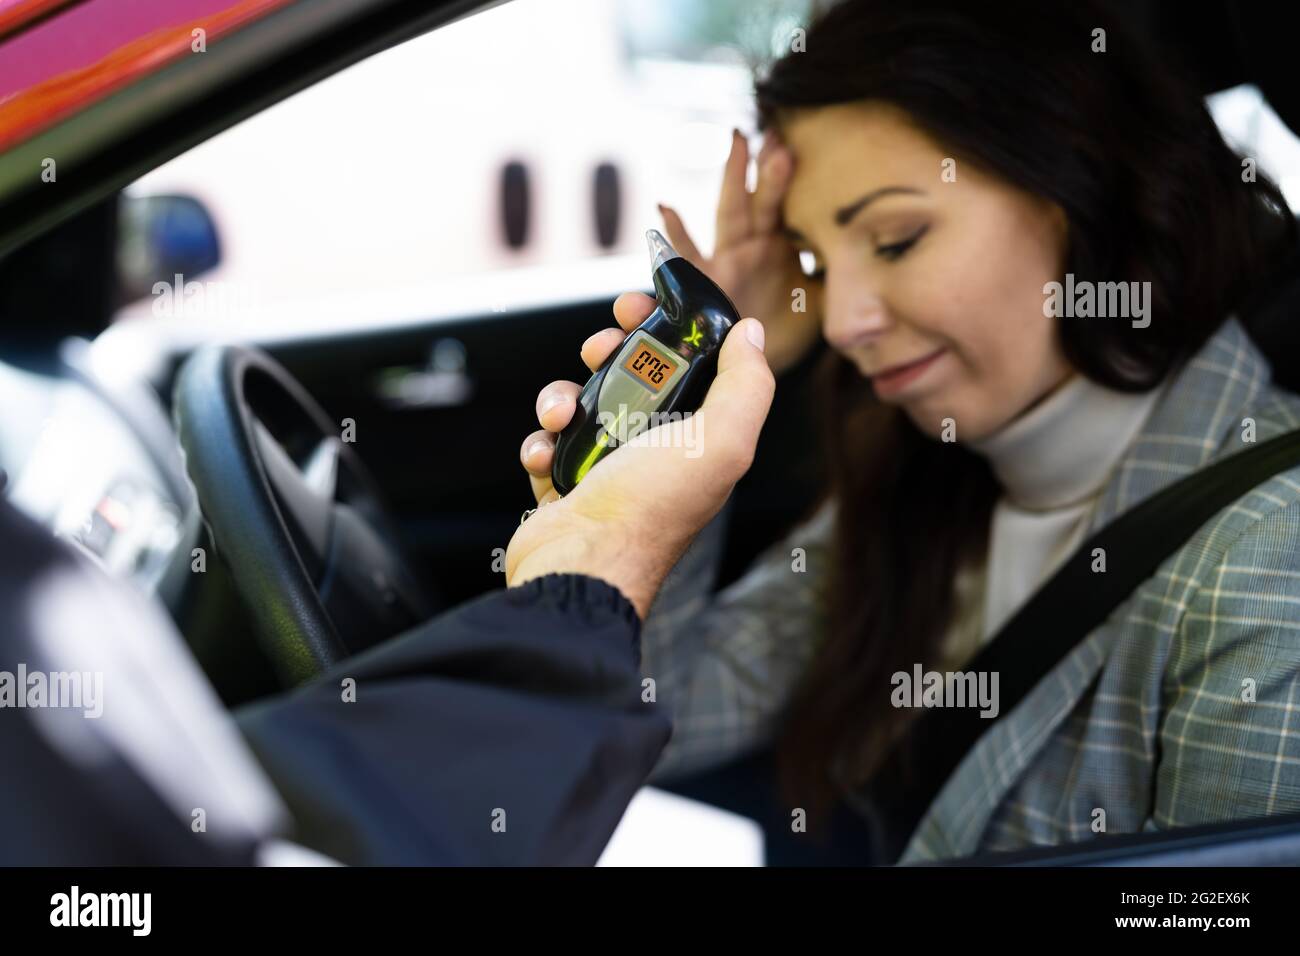 Sad Woman With Alcohol Intoxication Stopped By Policeman Stock Photo